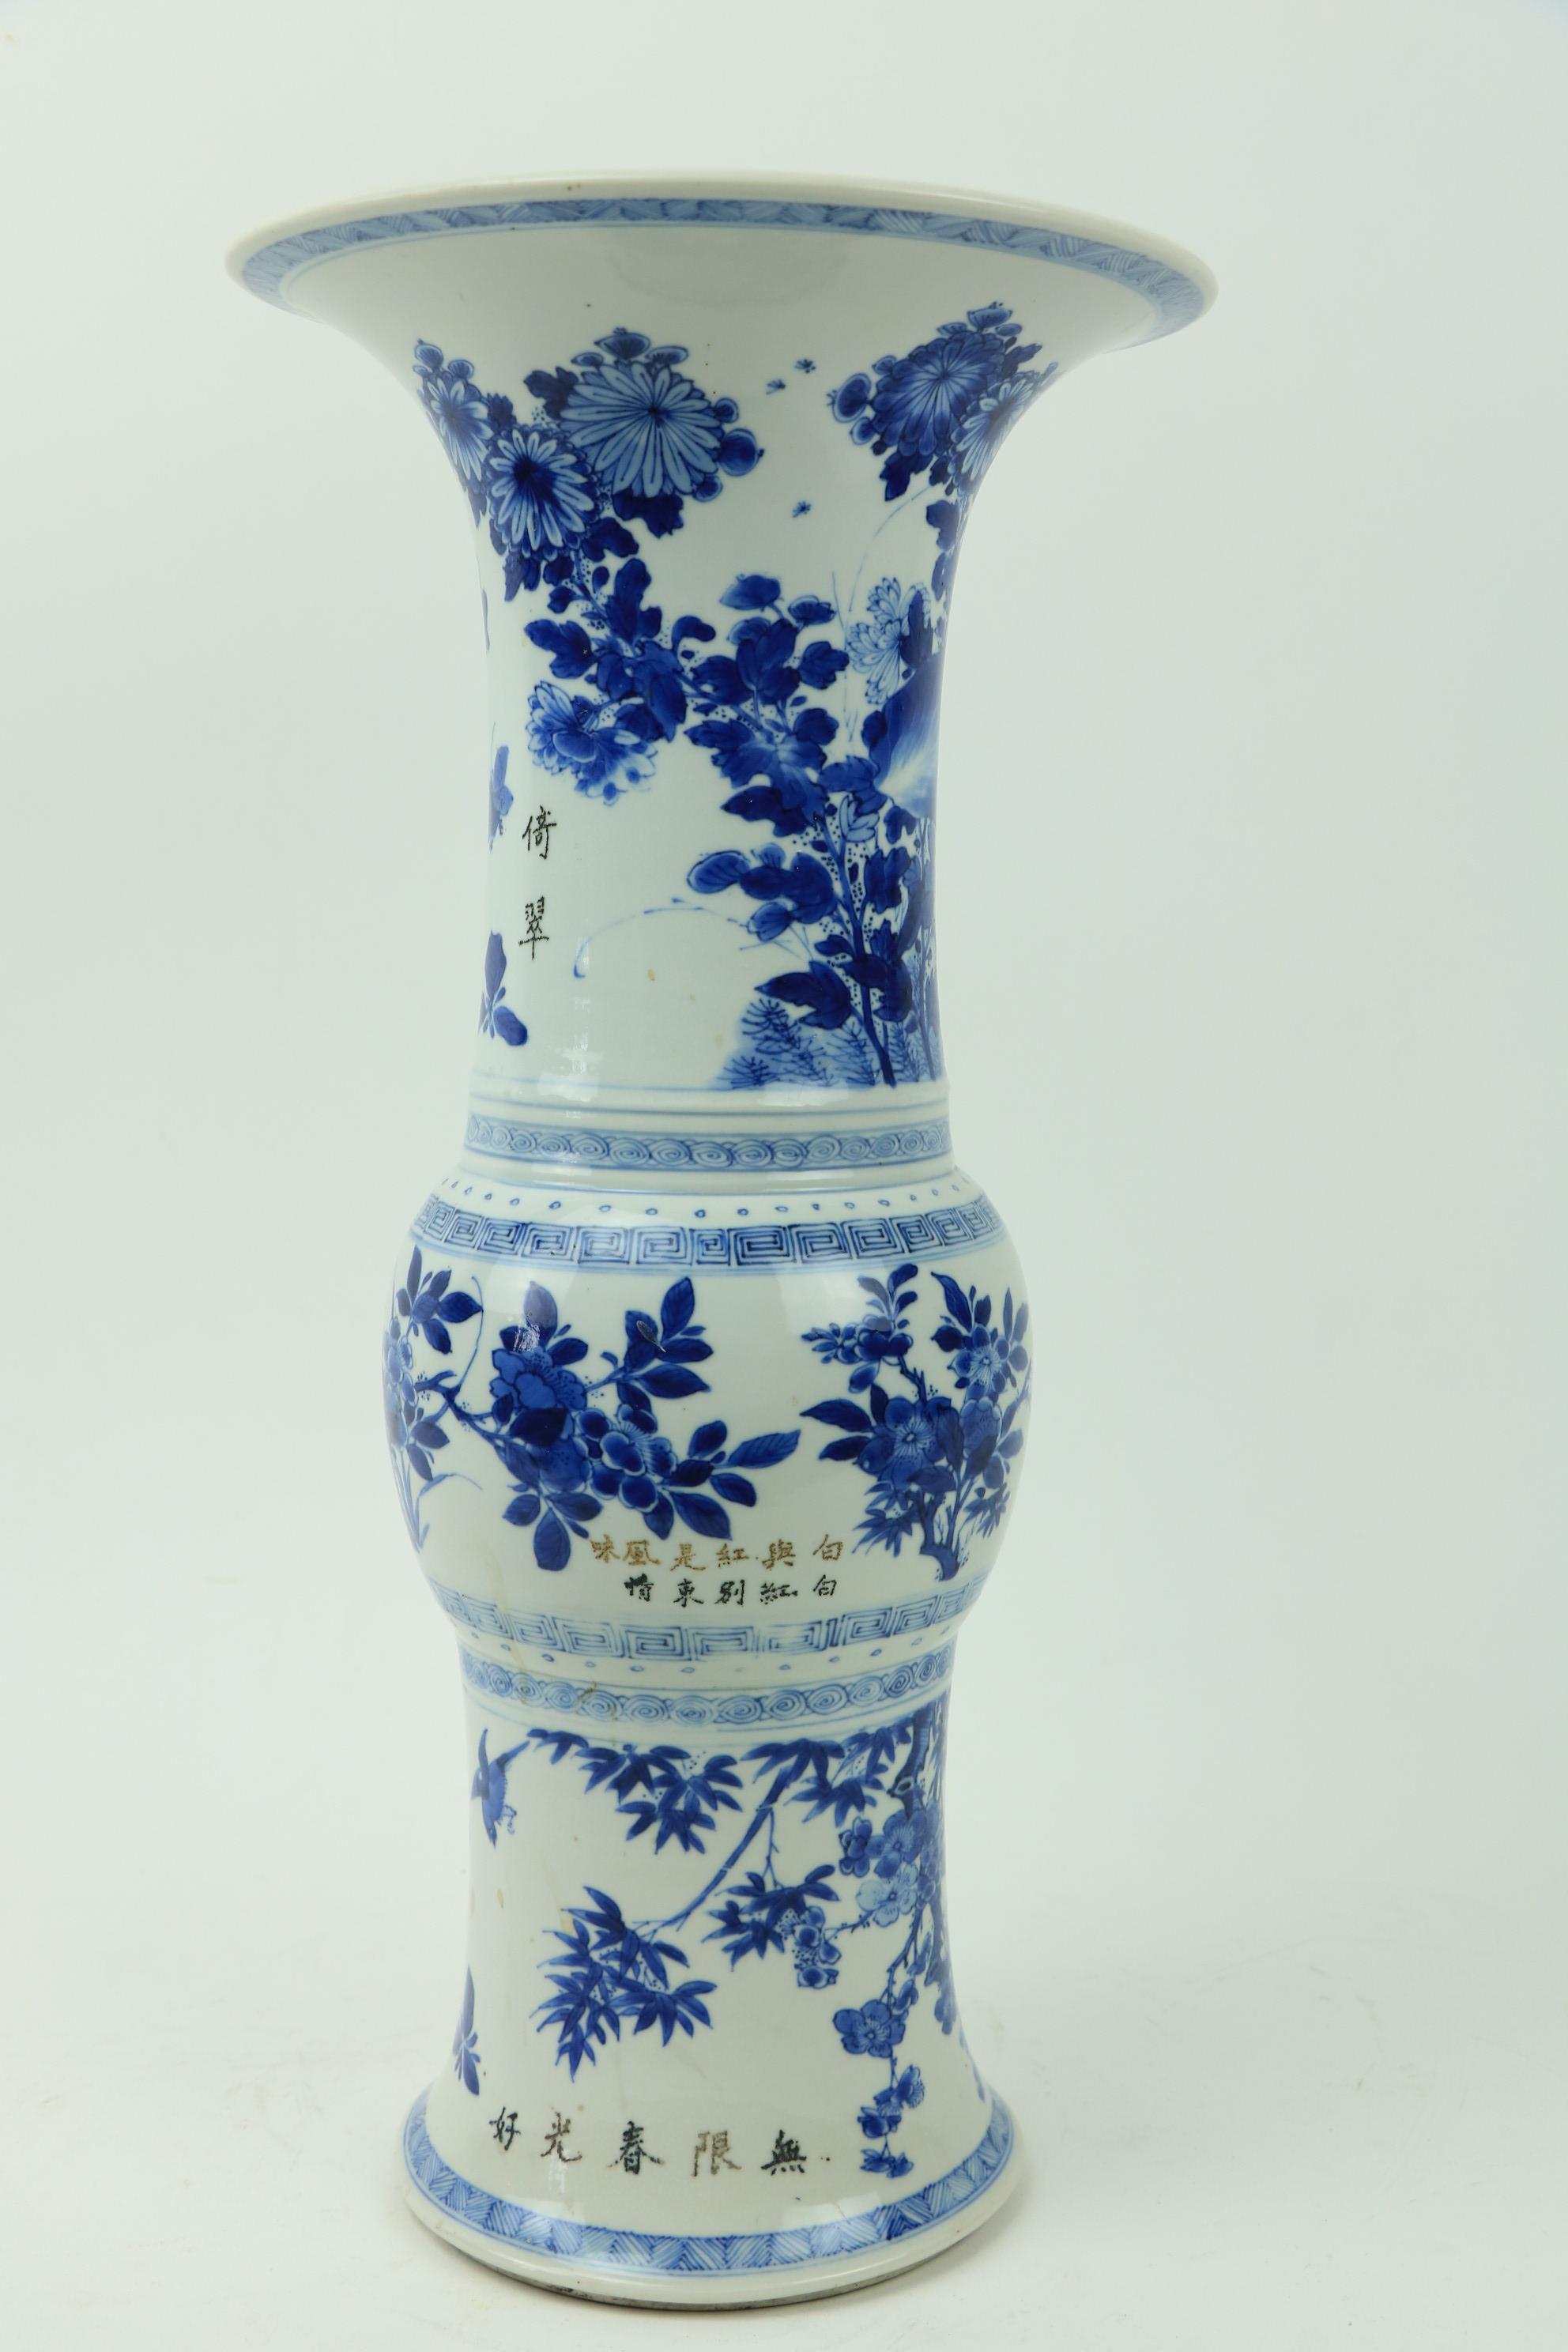 A large important Kangxi period blue and white Gu Vase, 18th Century, decorated with birds and